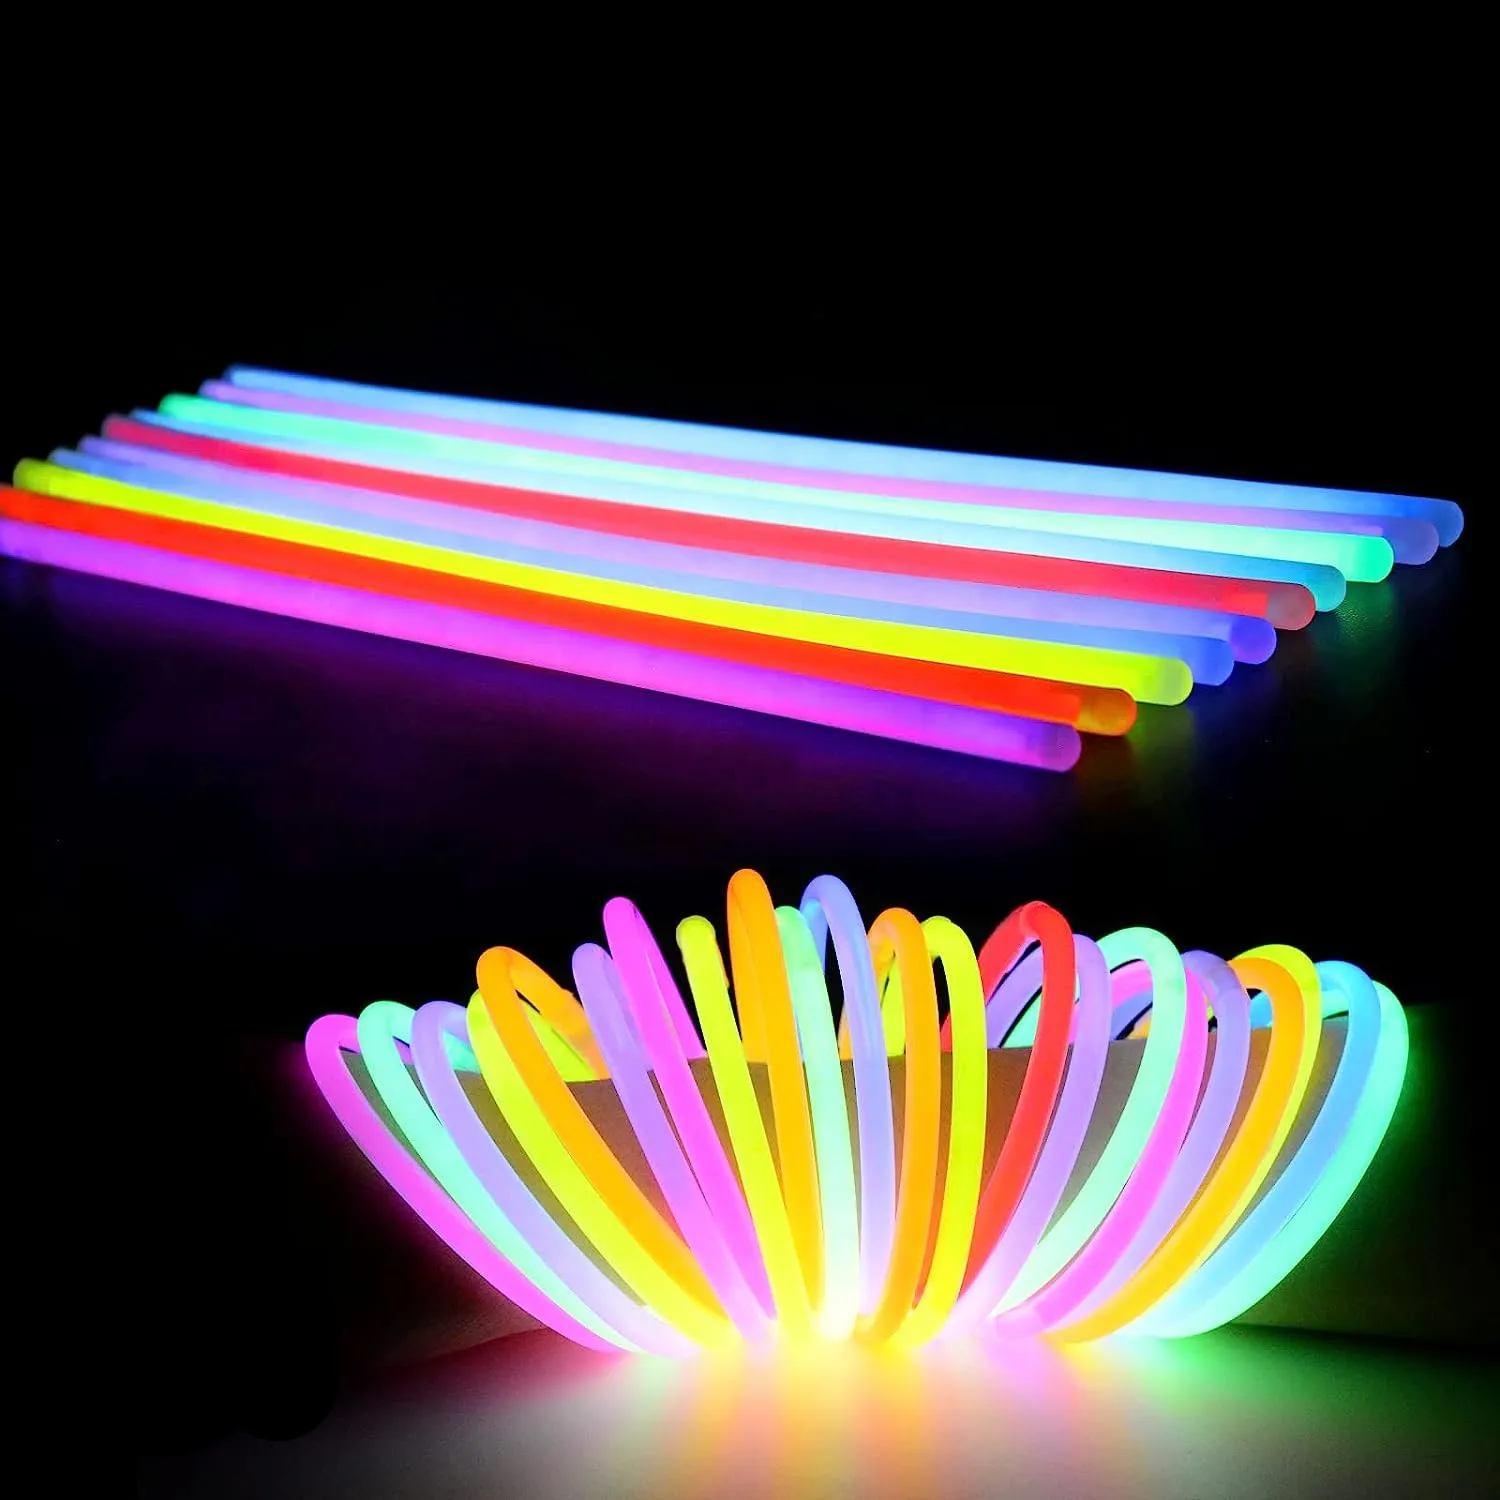 

100 Pcs Glow Sticks Bulk Glow in The Dark Party Supplies 8" Glowsticks with Connectors for Glow Bracelets Free Shipping